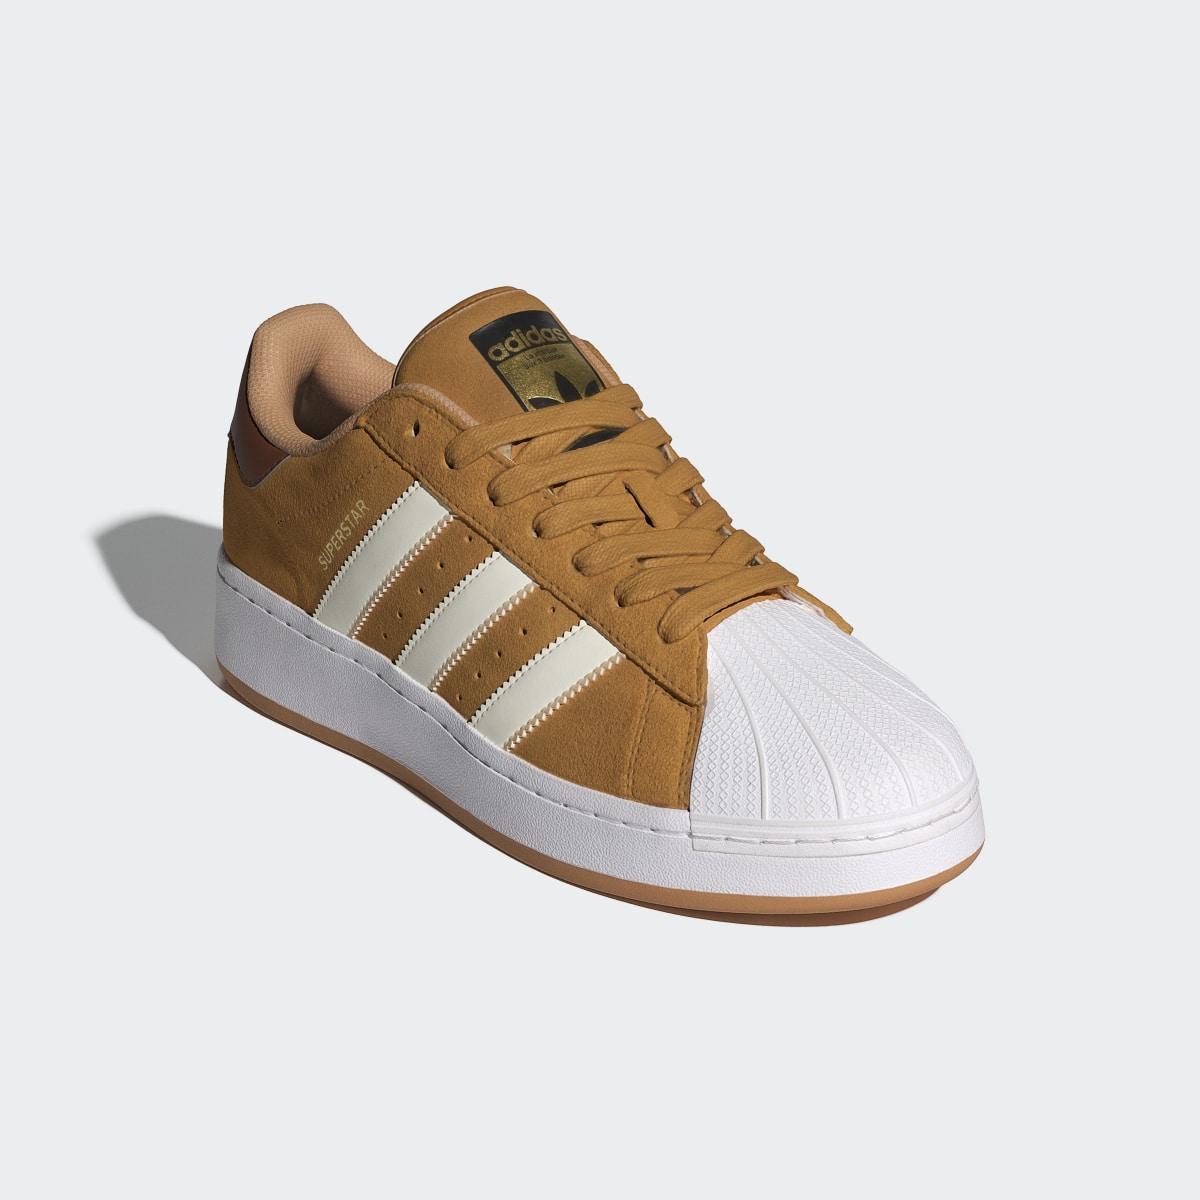 Adidas Superstar XLG Shoes. 4